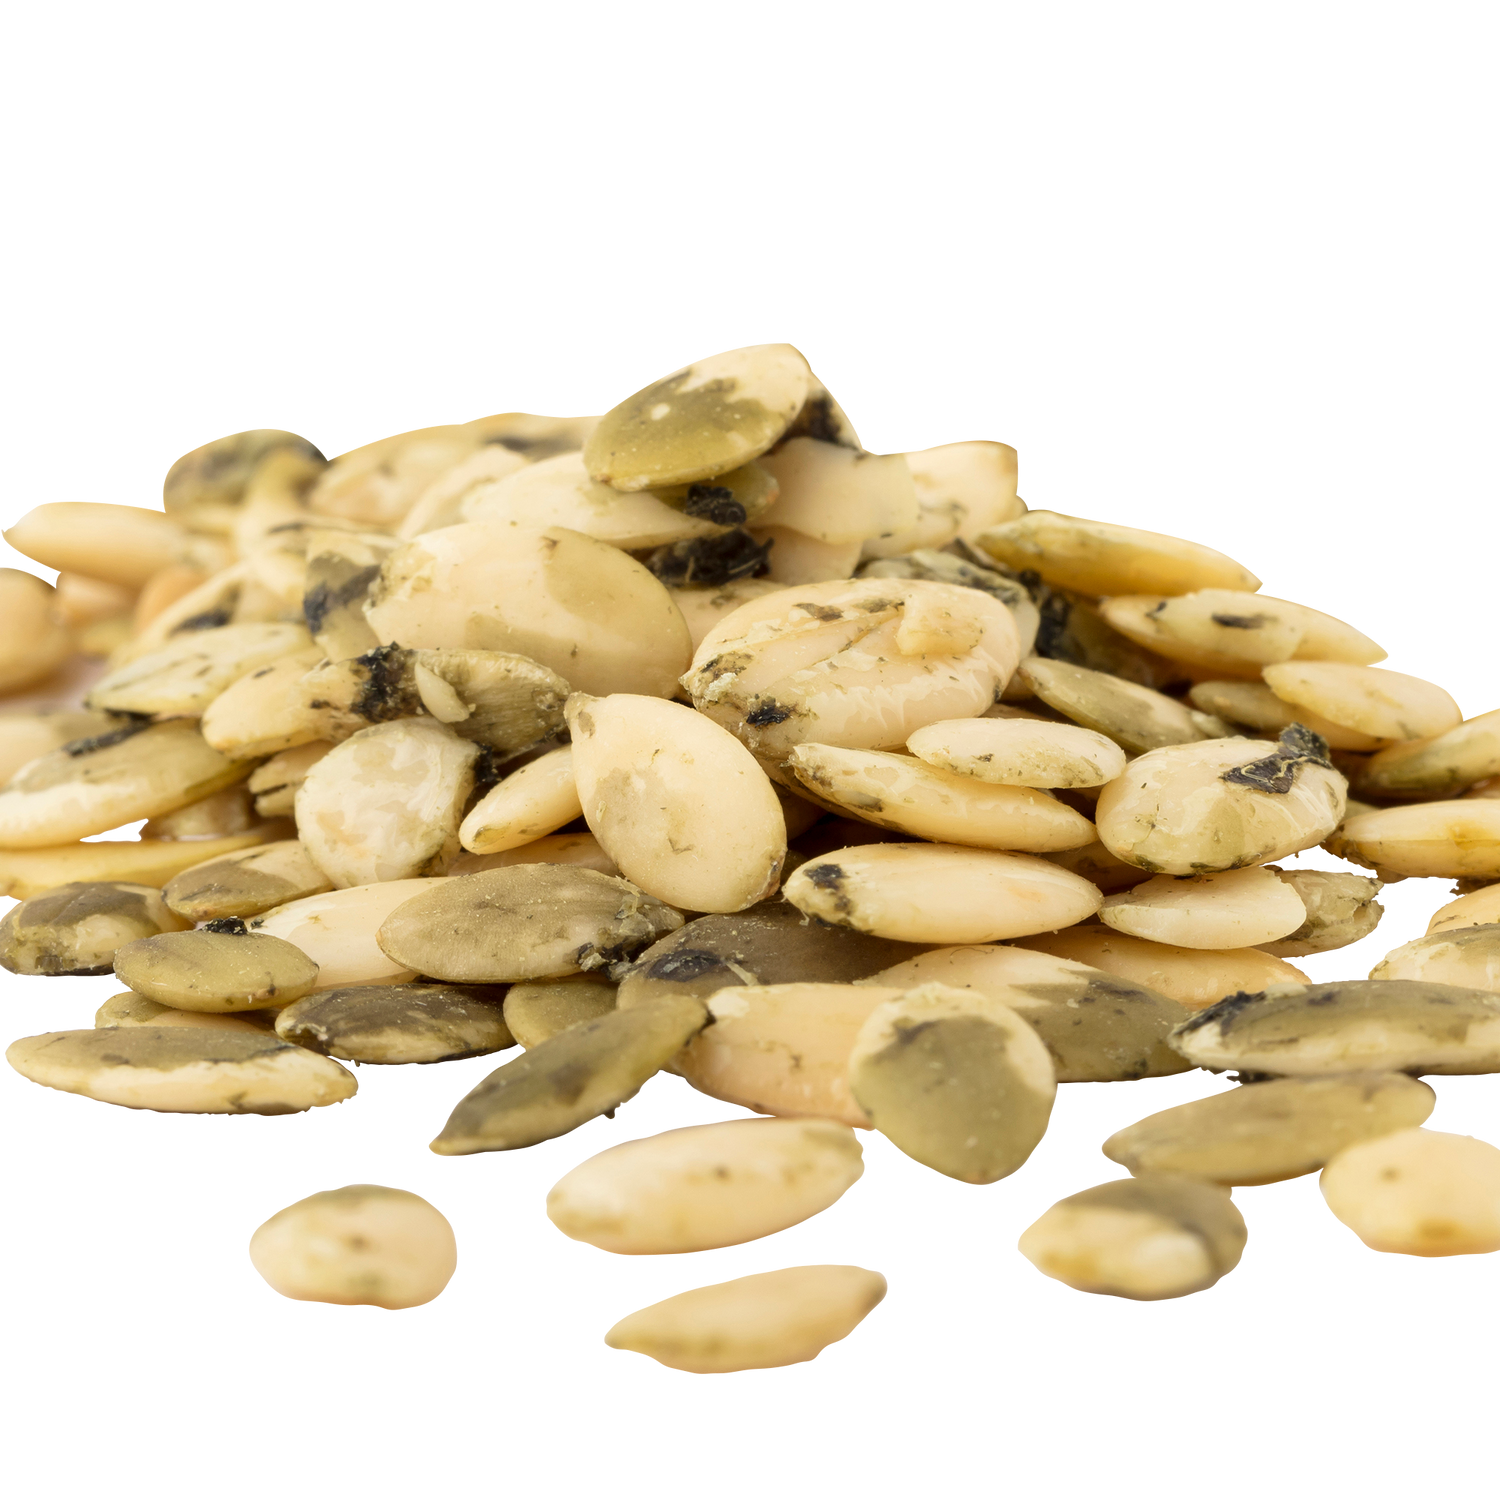 Sprouted Pumpkin Seeds - 6 Bags, 14oz Each